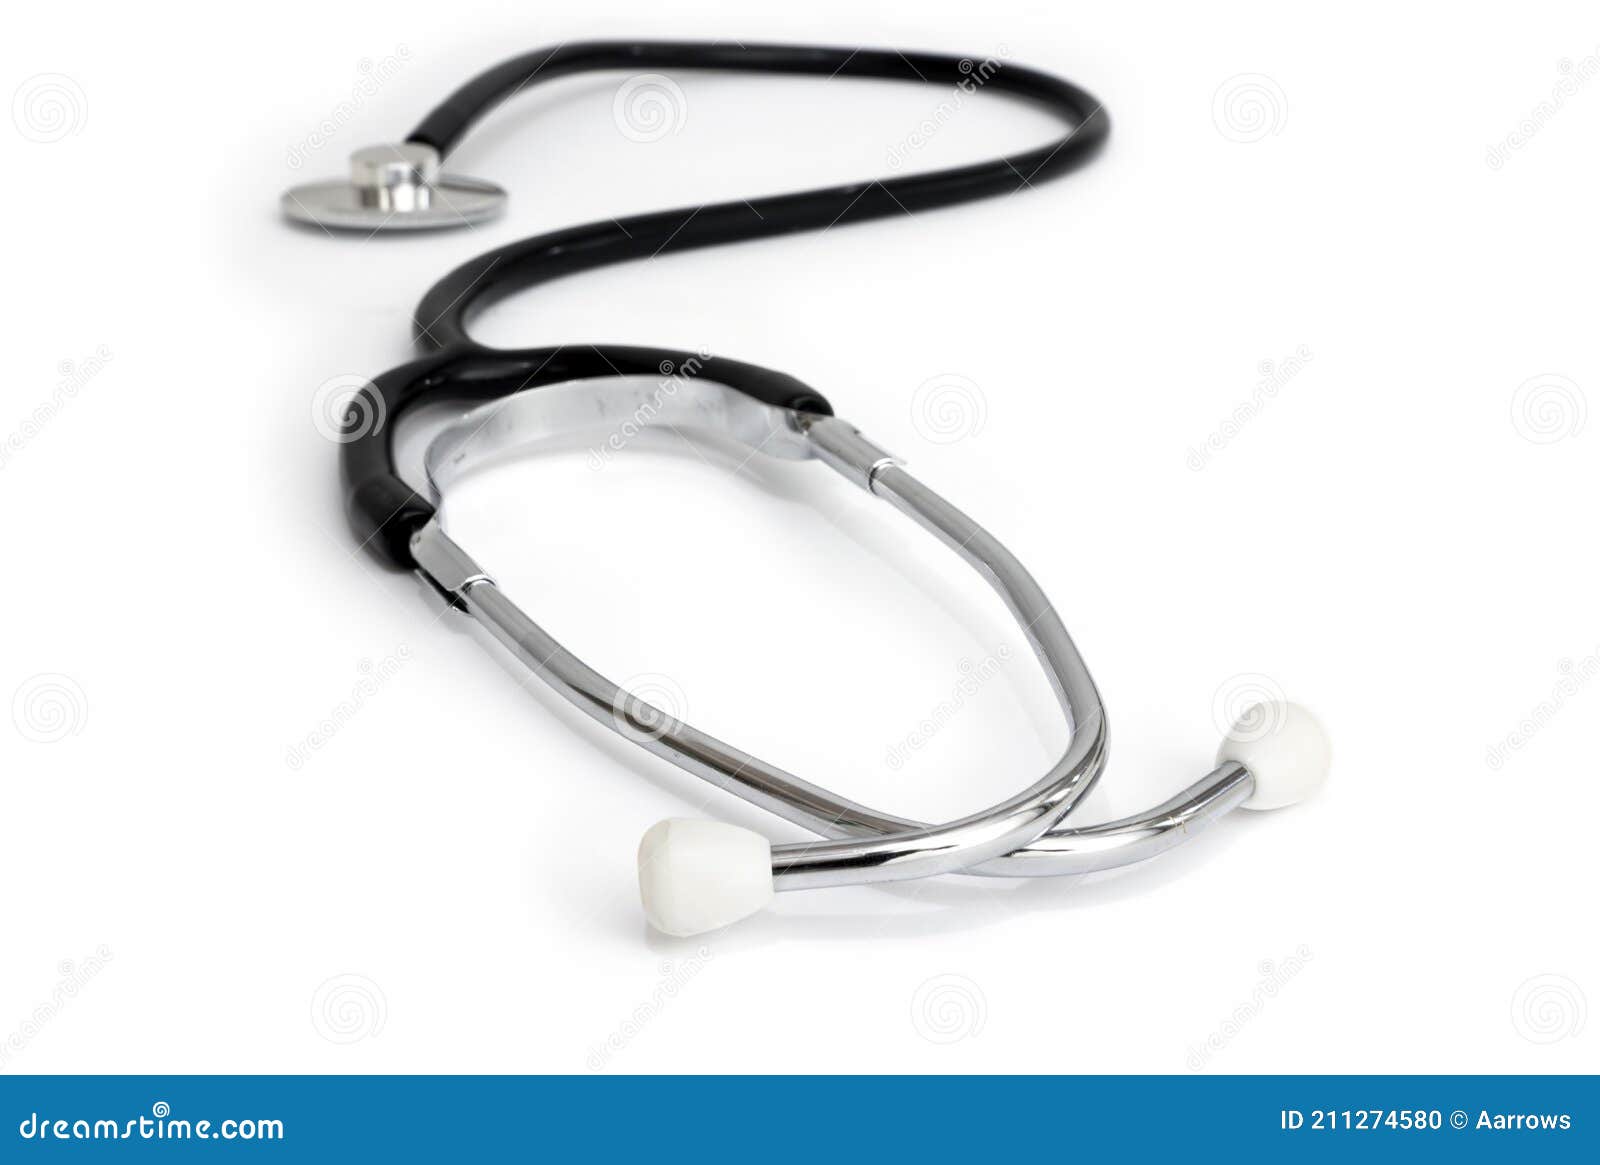 stethoscope  over a white background